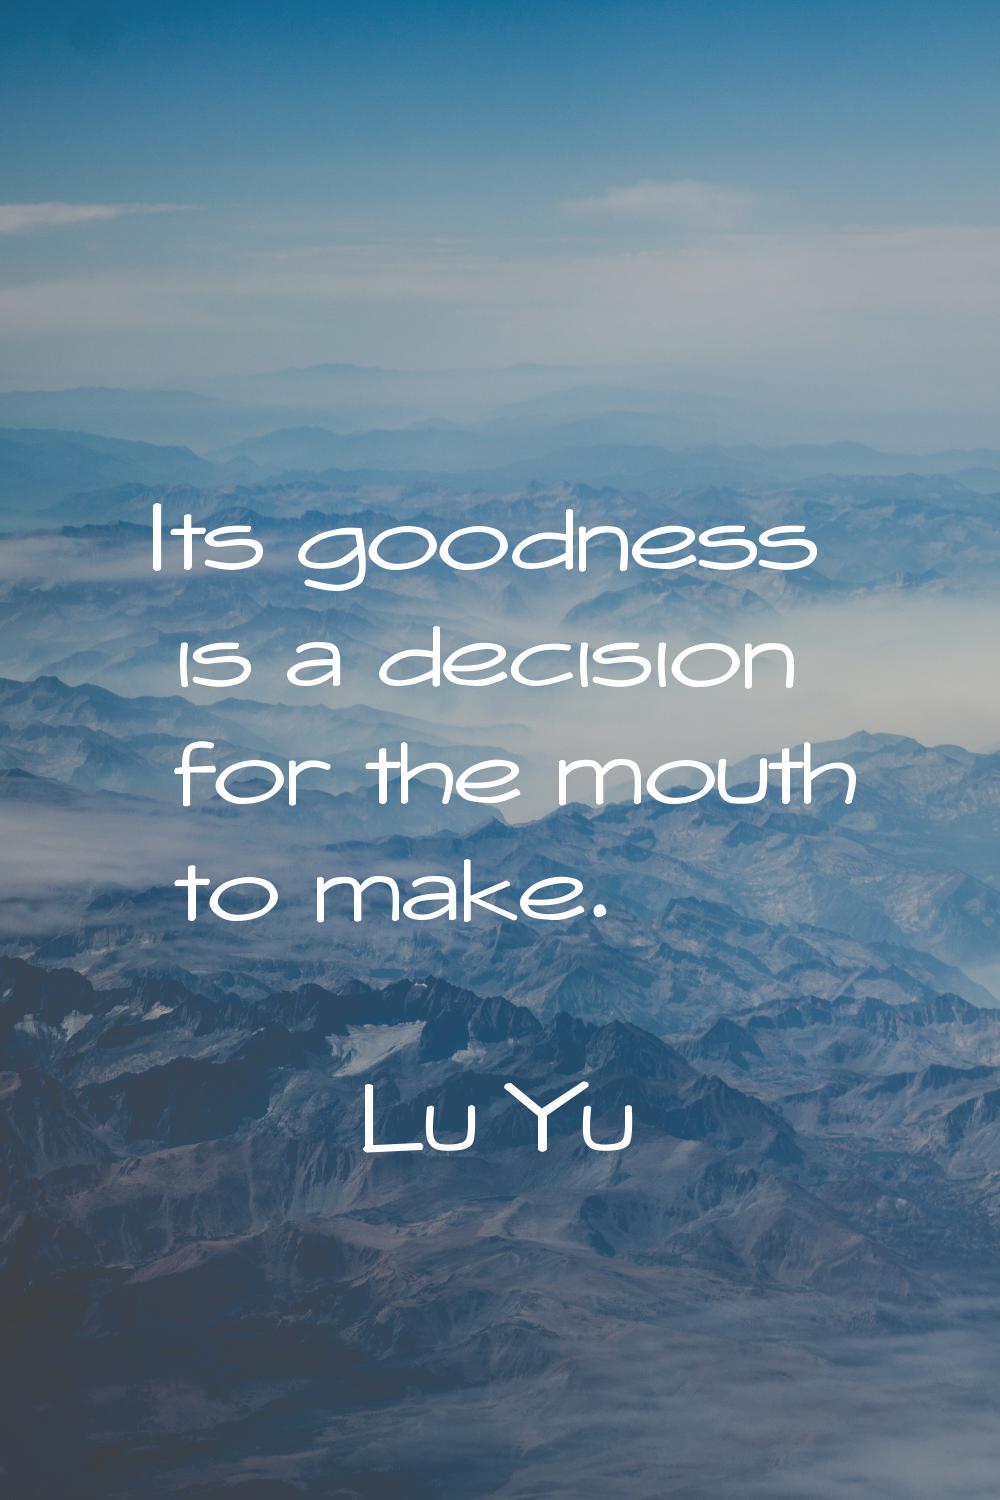 Its goodness is a decision for the mouth to make.